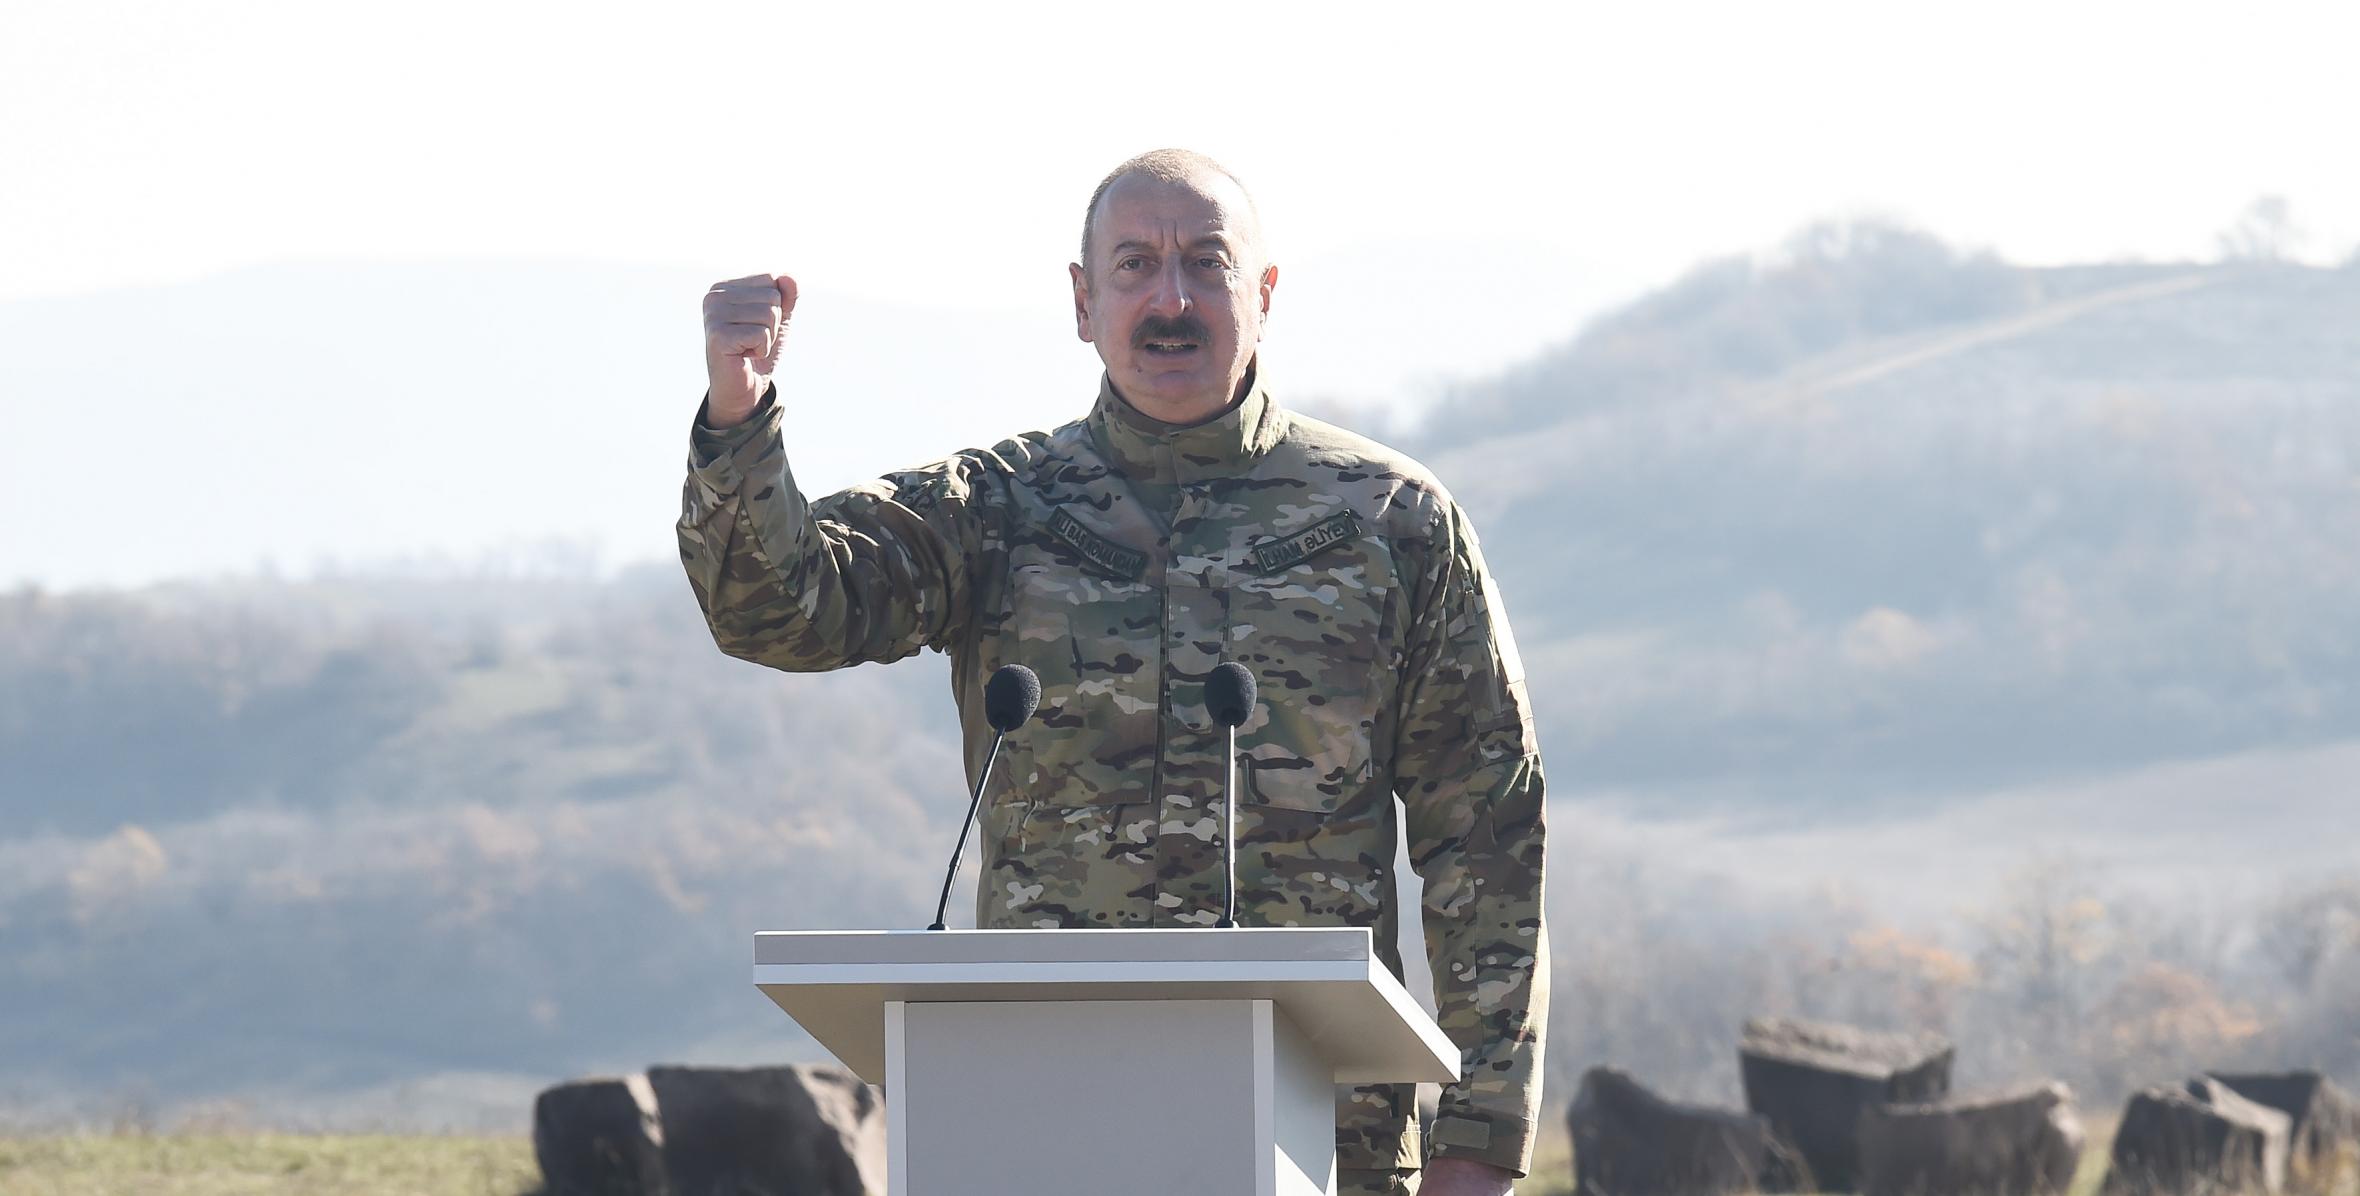 President, Commander-in-Chief of Armed Forces Ilham Aliyev made a speech in front of servicemen in Shusha